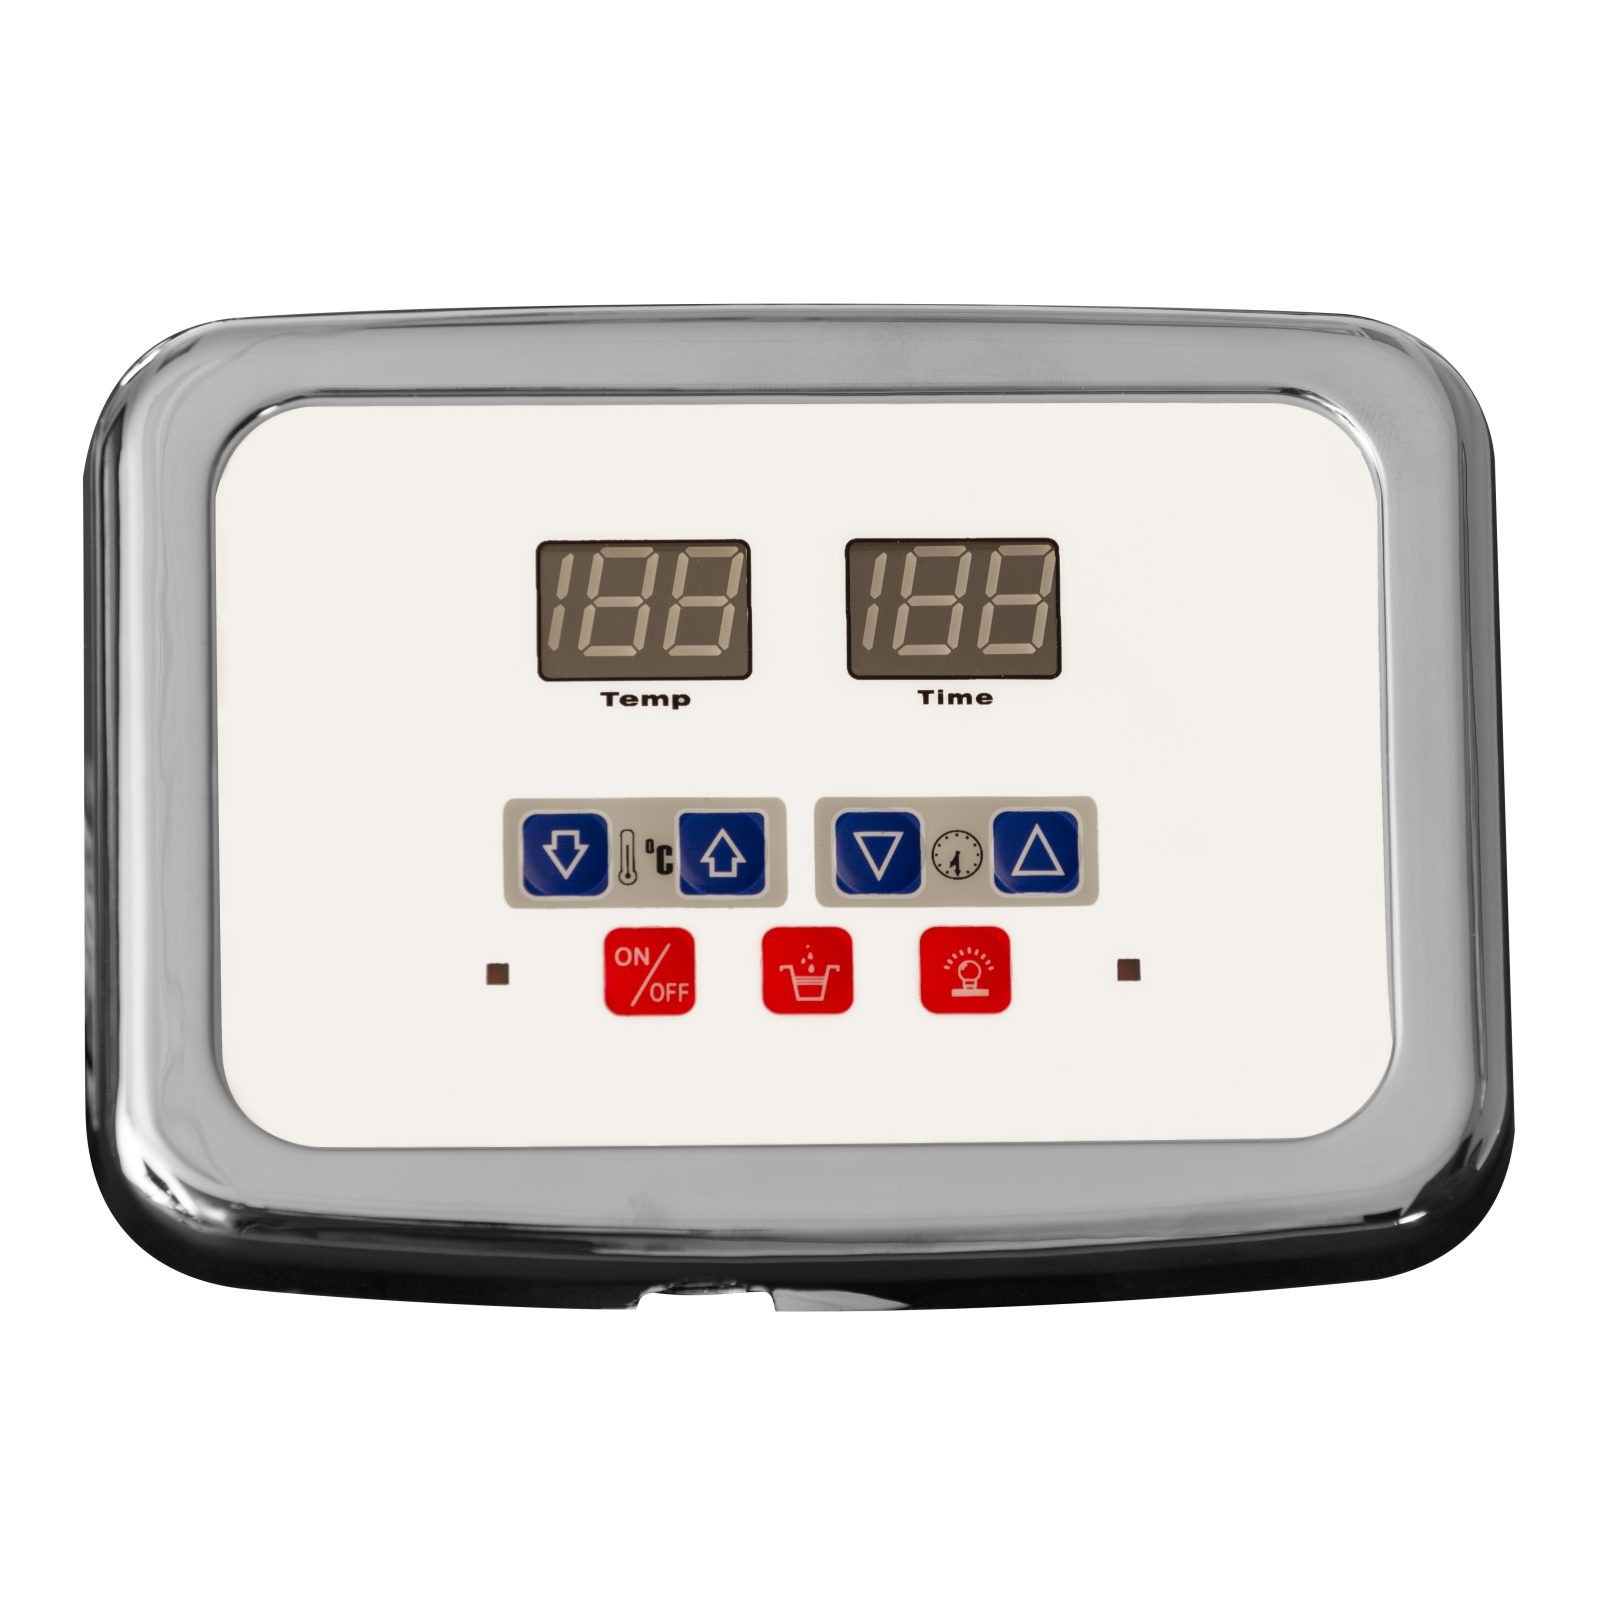 Black or White Keypads in 6kW 9kW, White Dual Keypad 9kW or 12kW Superior Steam Bath Generator DeLuxe